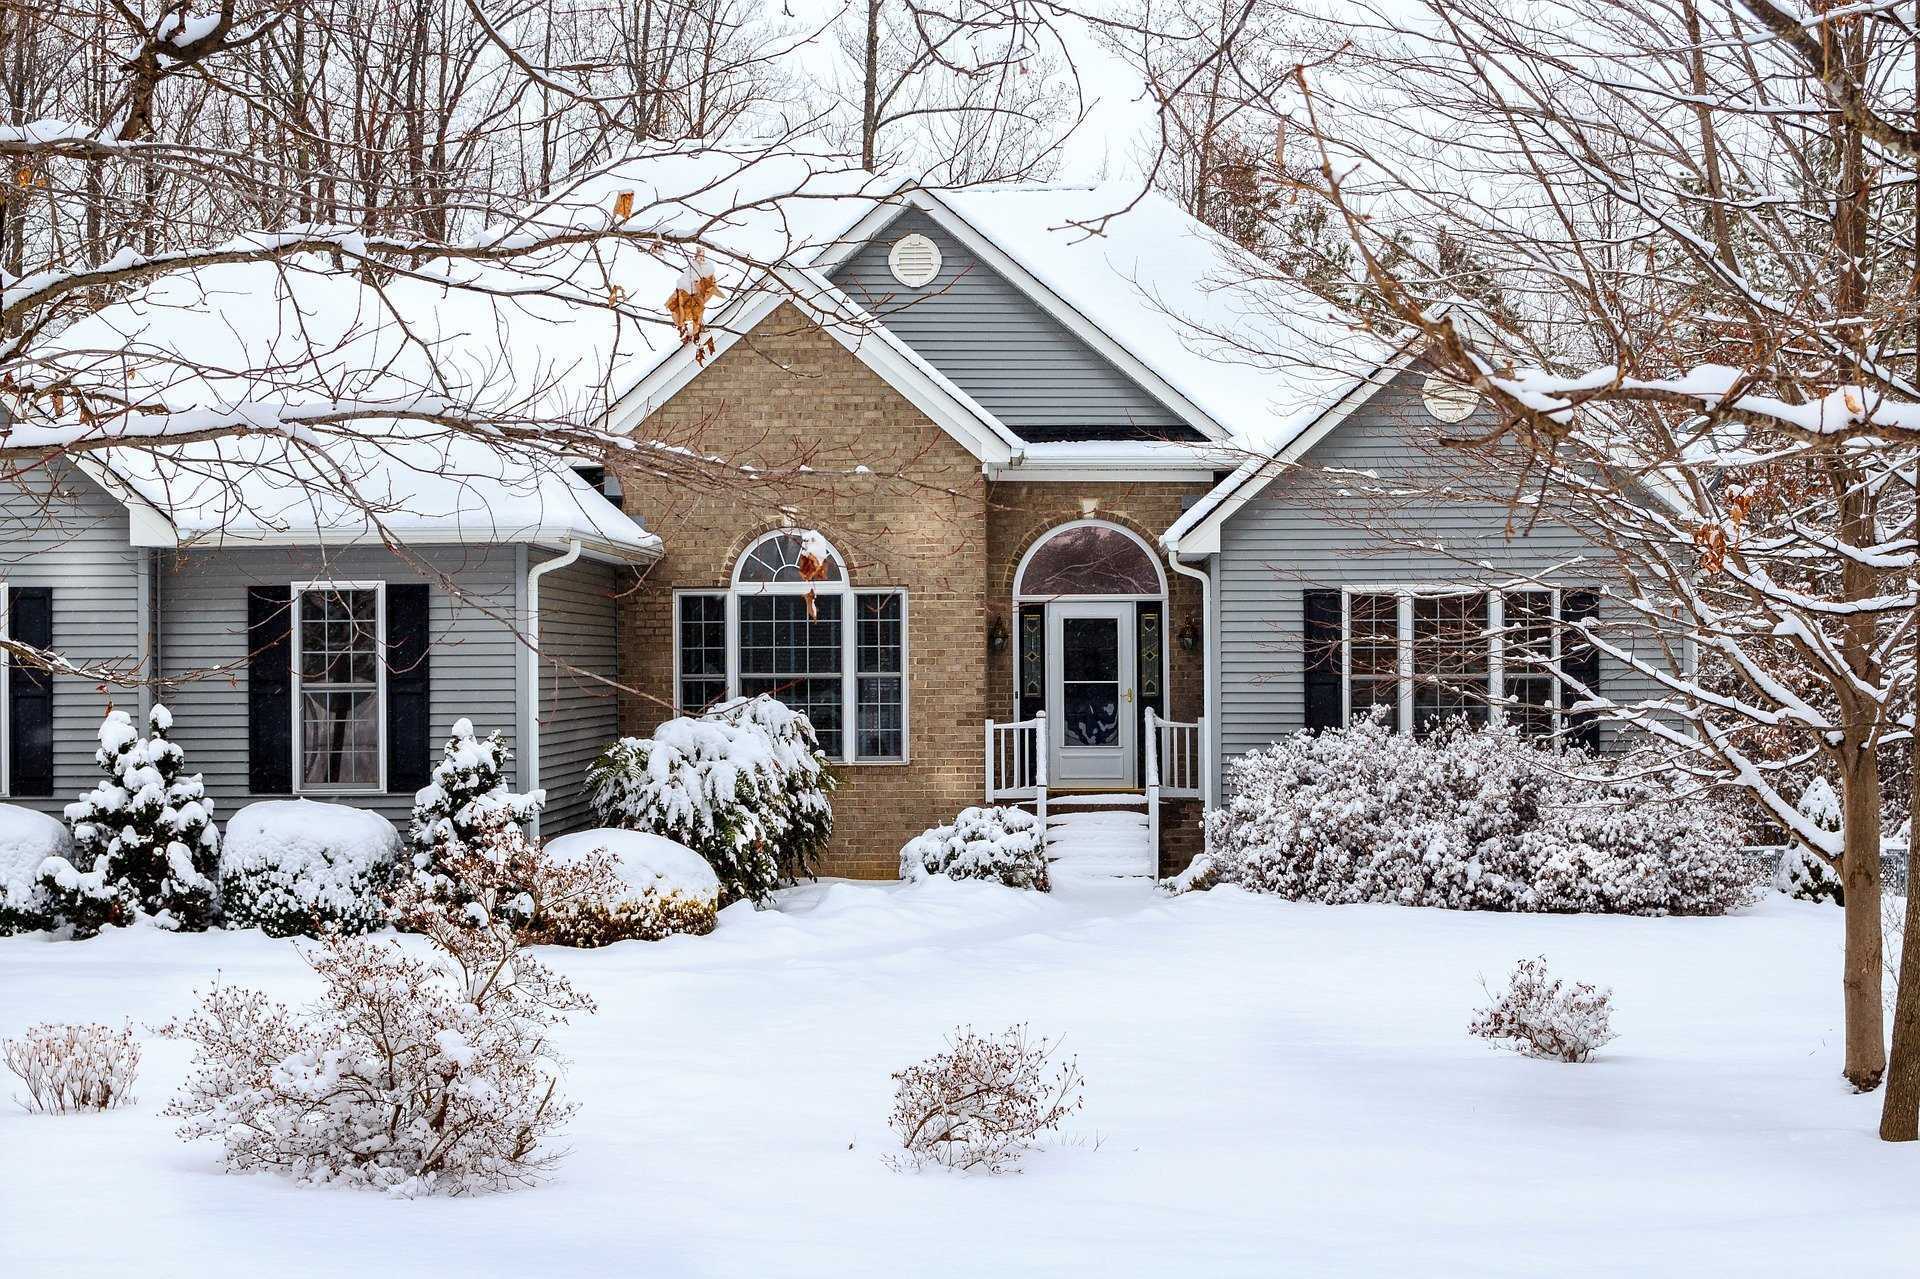 Selling your home in the winter: A great idea